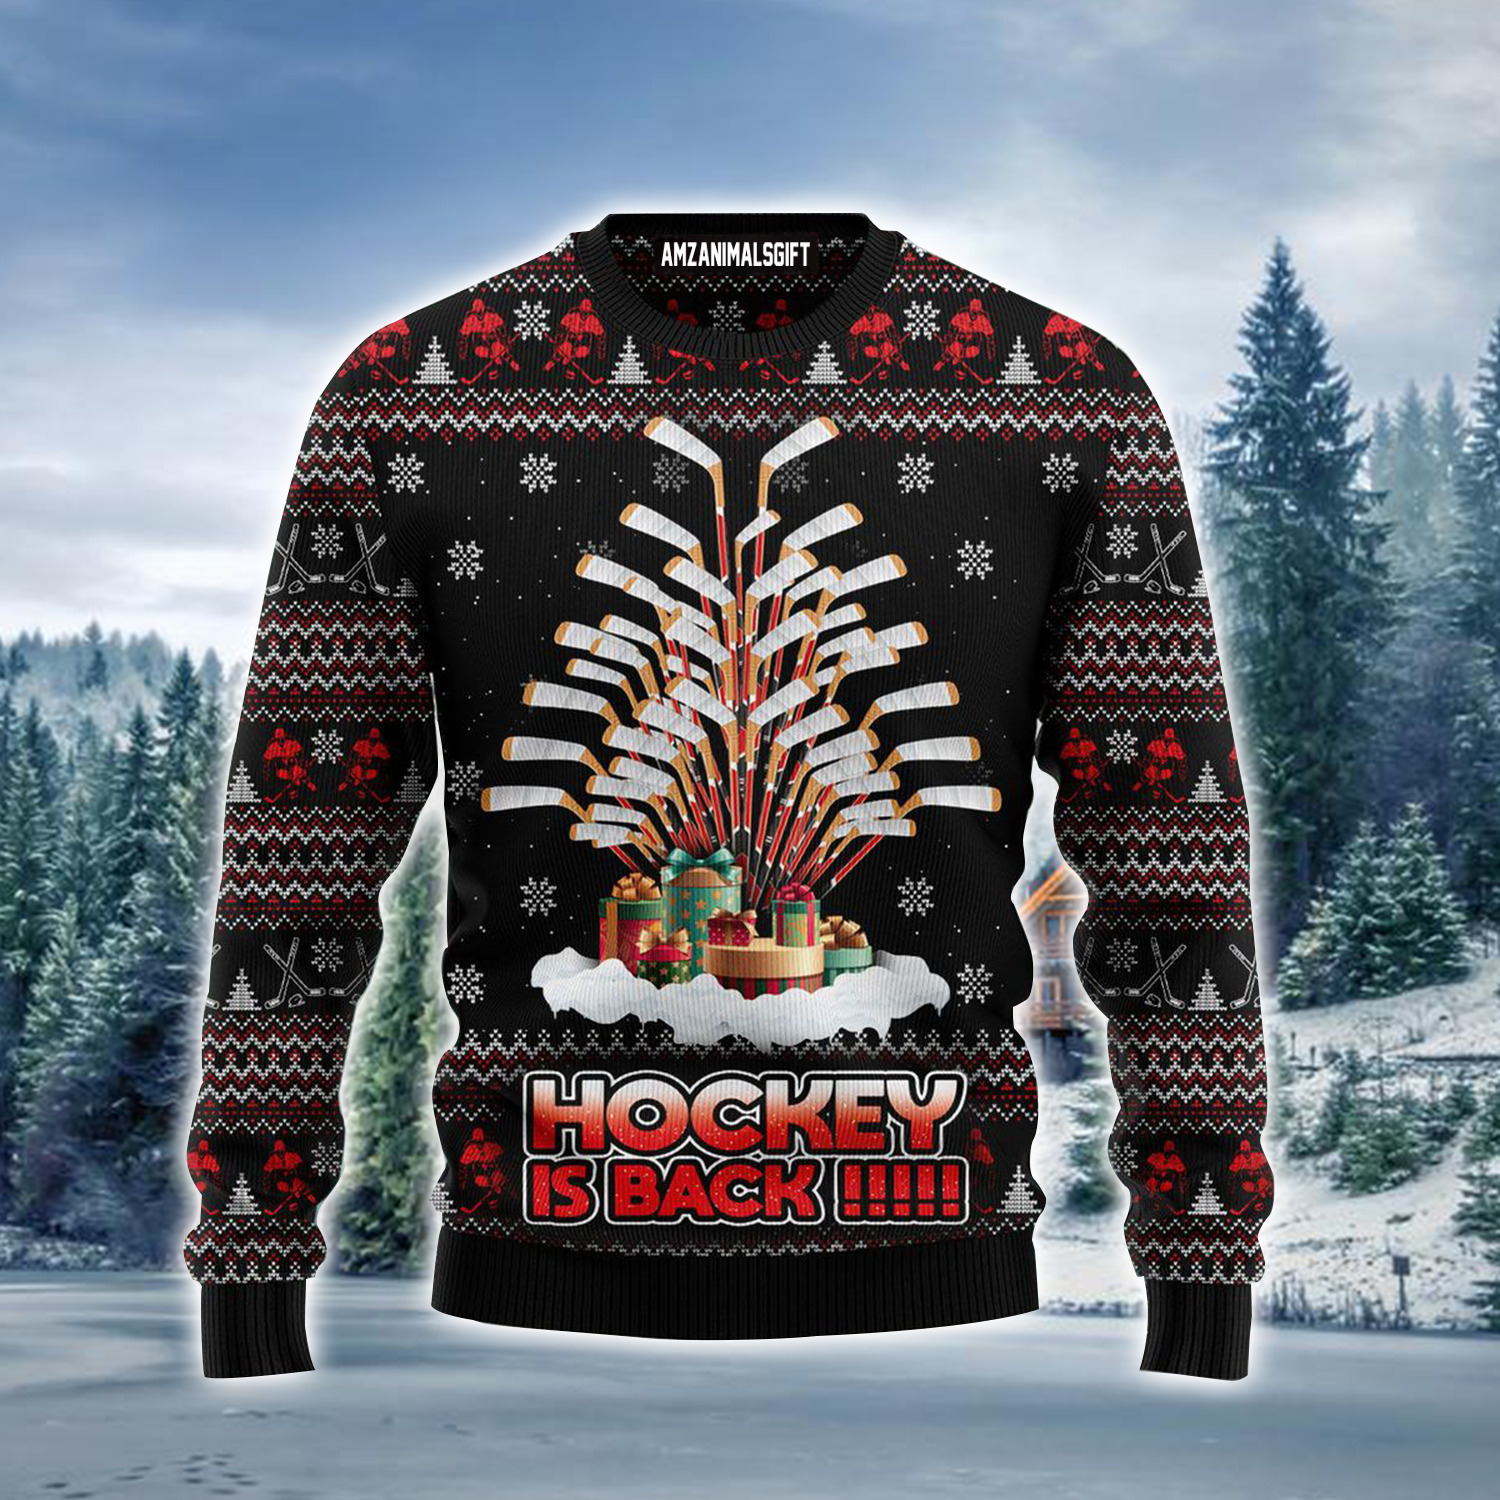 Hockey Ugly Sweater, Hockey Is Back Ugly Sweater, Christmas Pattern Black Ugly Sweater For Men & Women, Perfect Gift For Hockey Lovers, Family